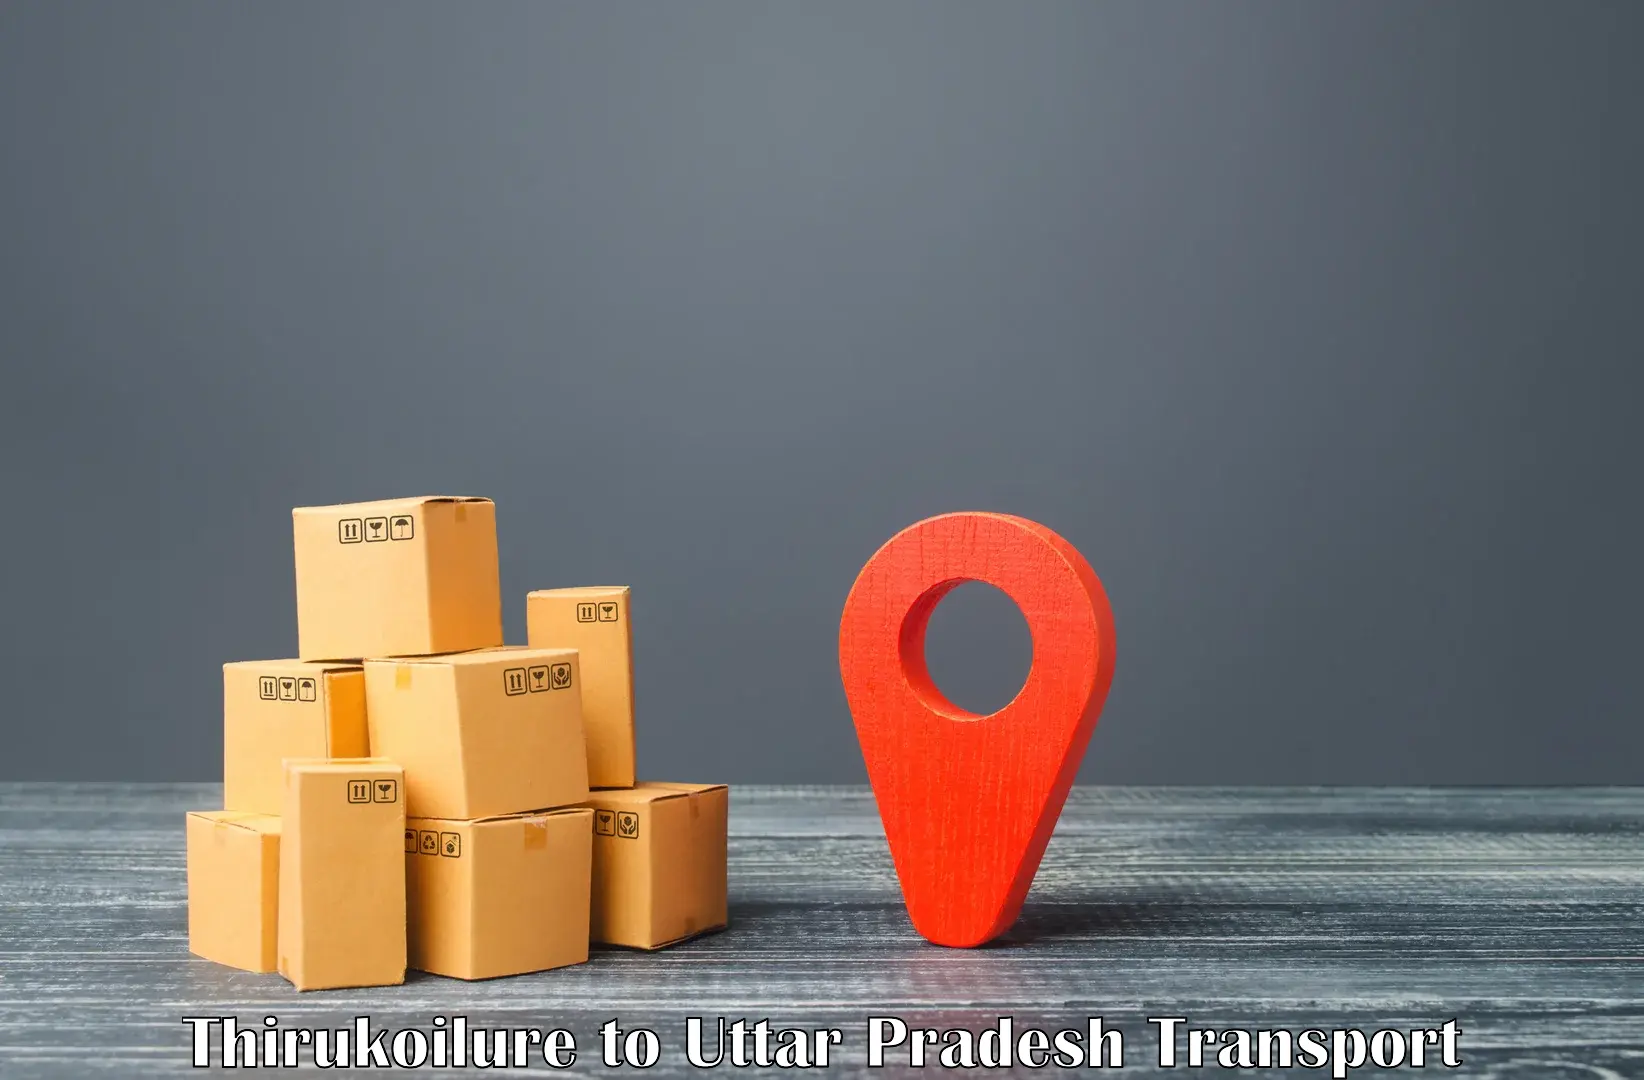 Logistics transportation services in Thirukoilure to Mau